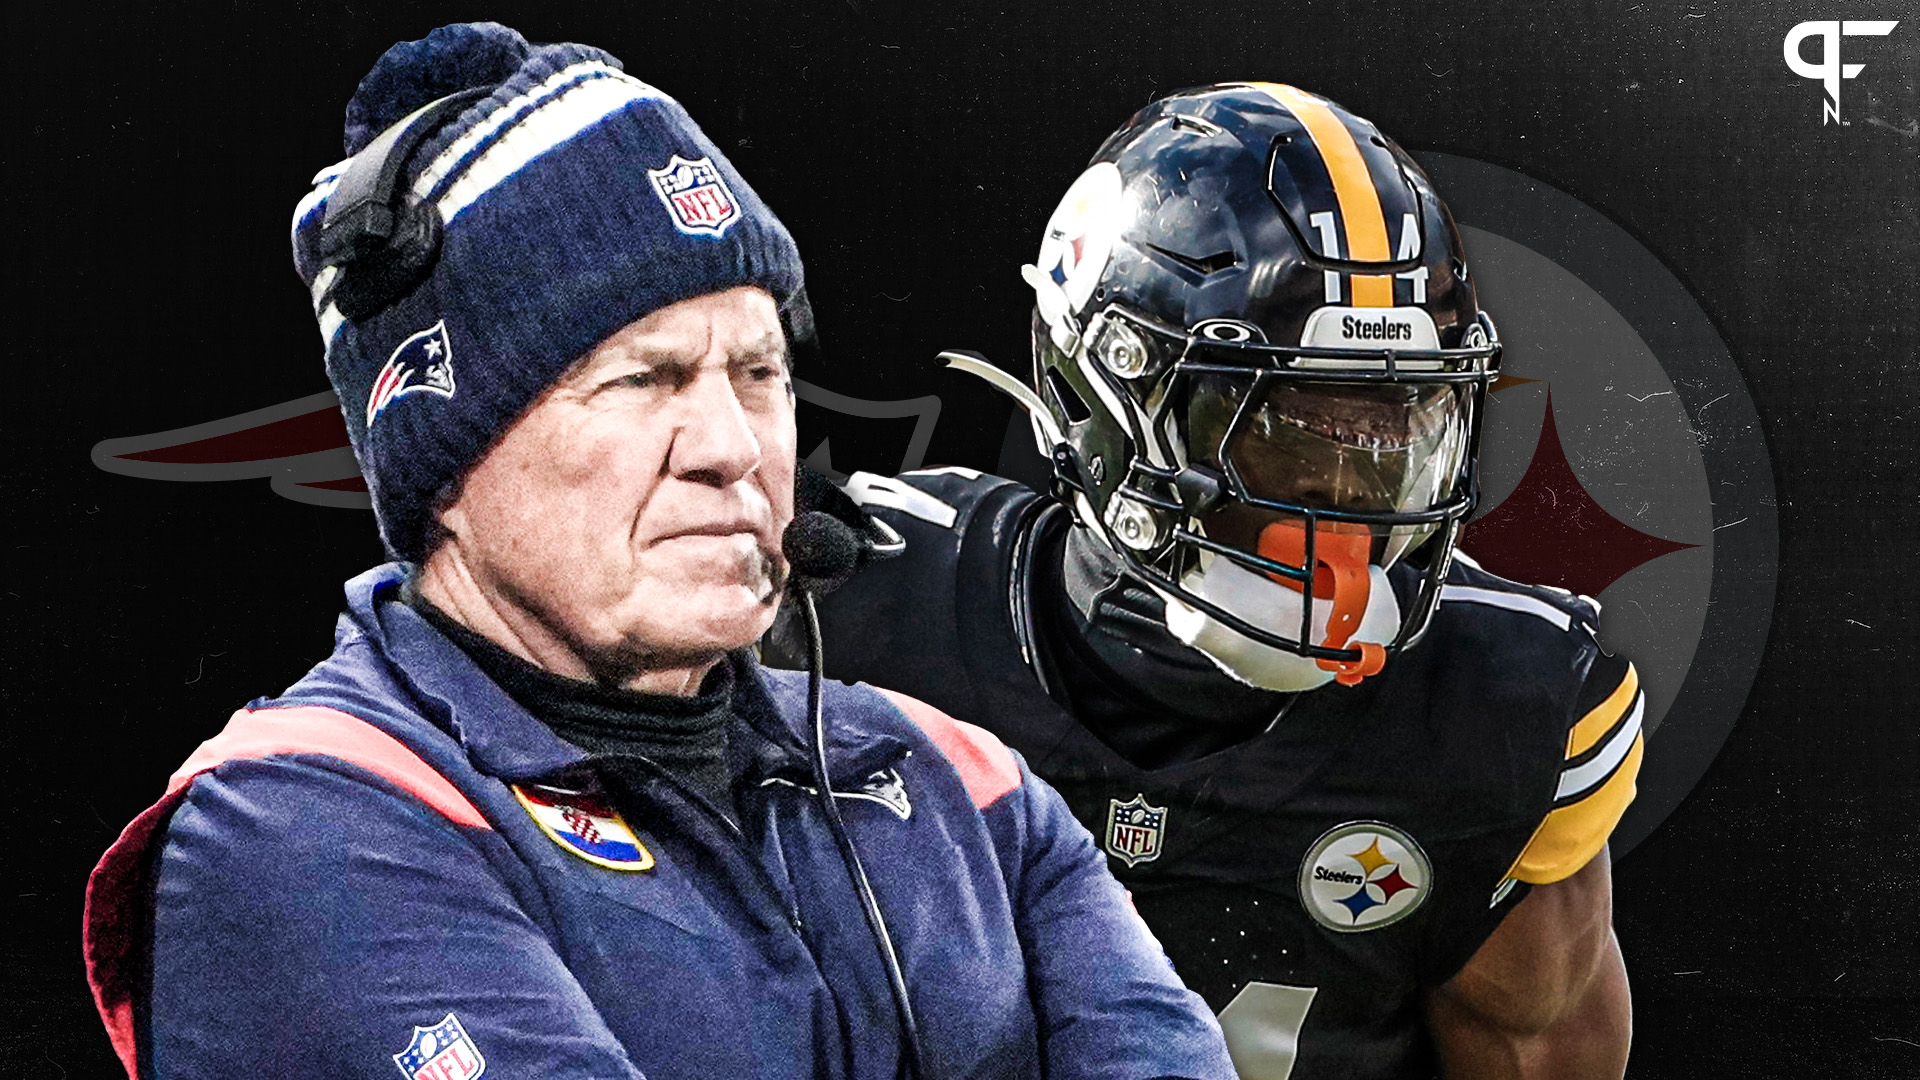 Patriots vs. Steelers Predictions and Expert Picks for Thursday Night Football: Back Bill Belichick or Mike Tomlin?